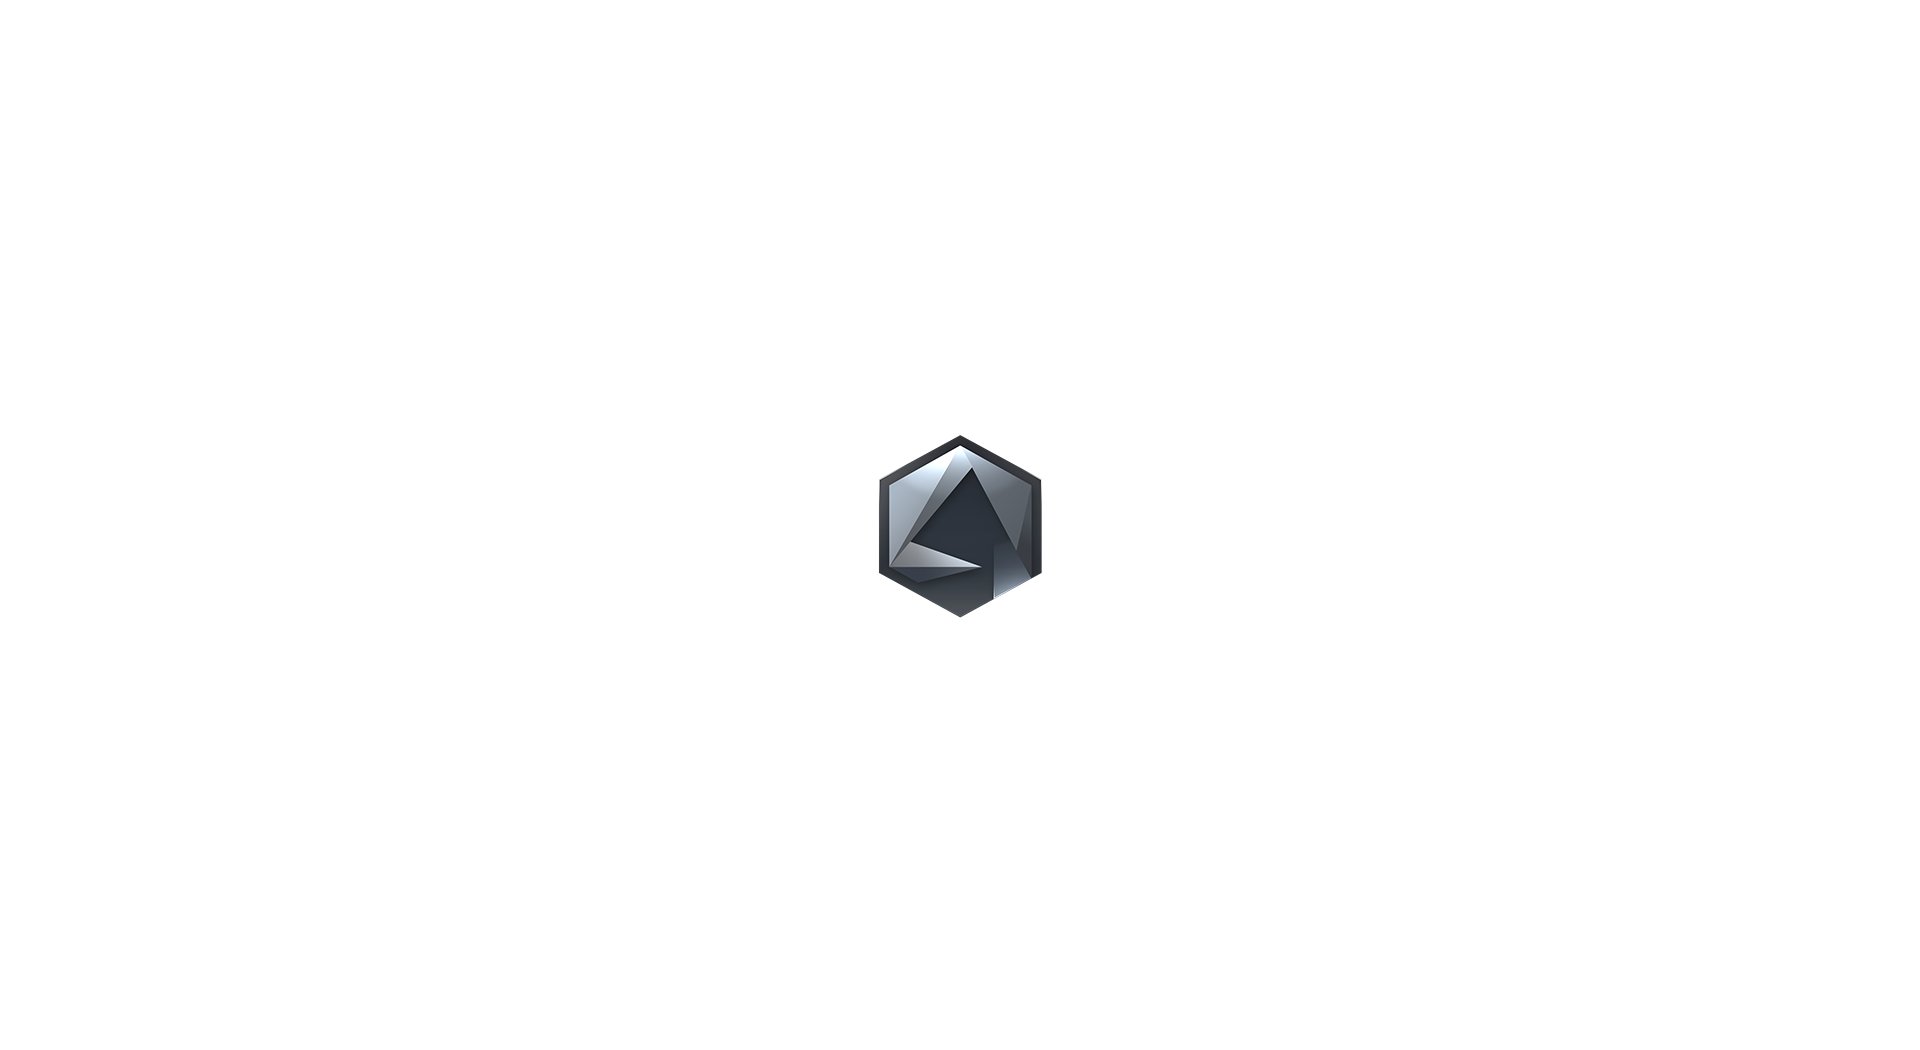 ARMOURY CRATE